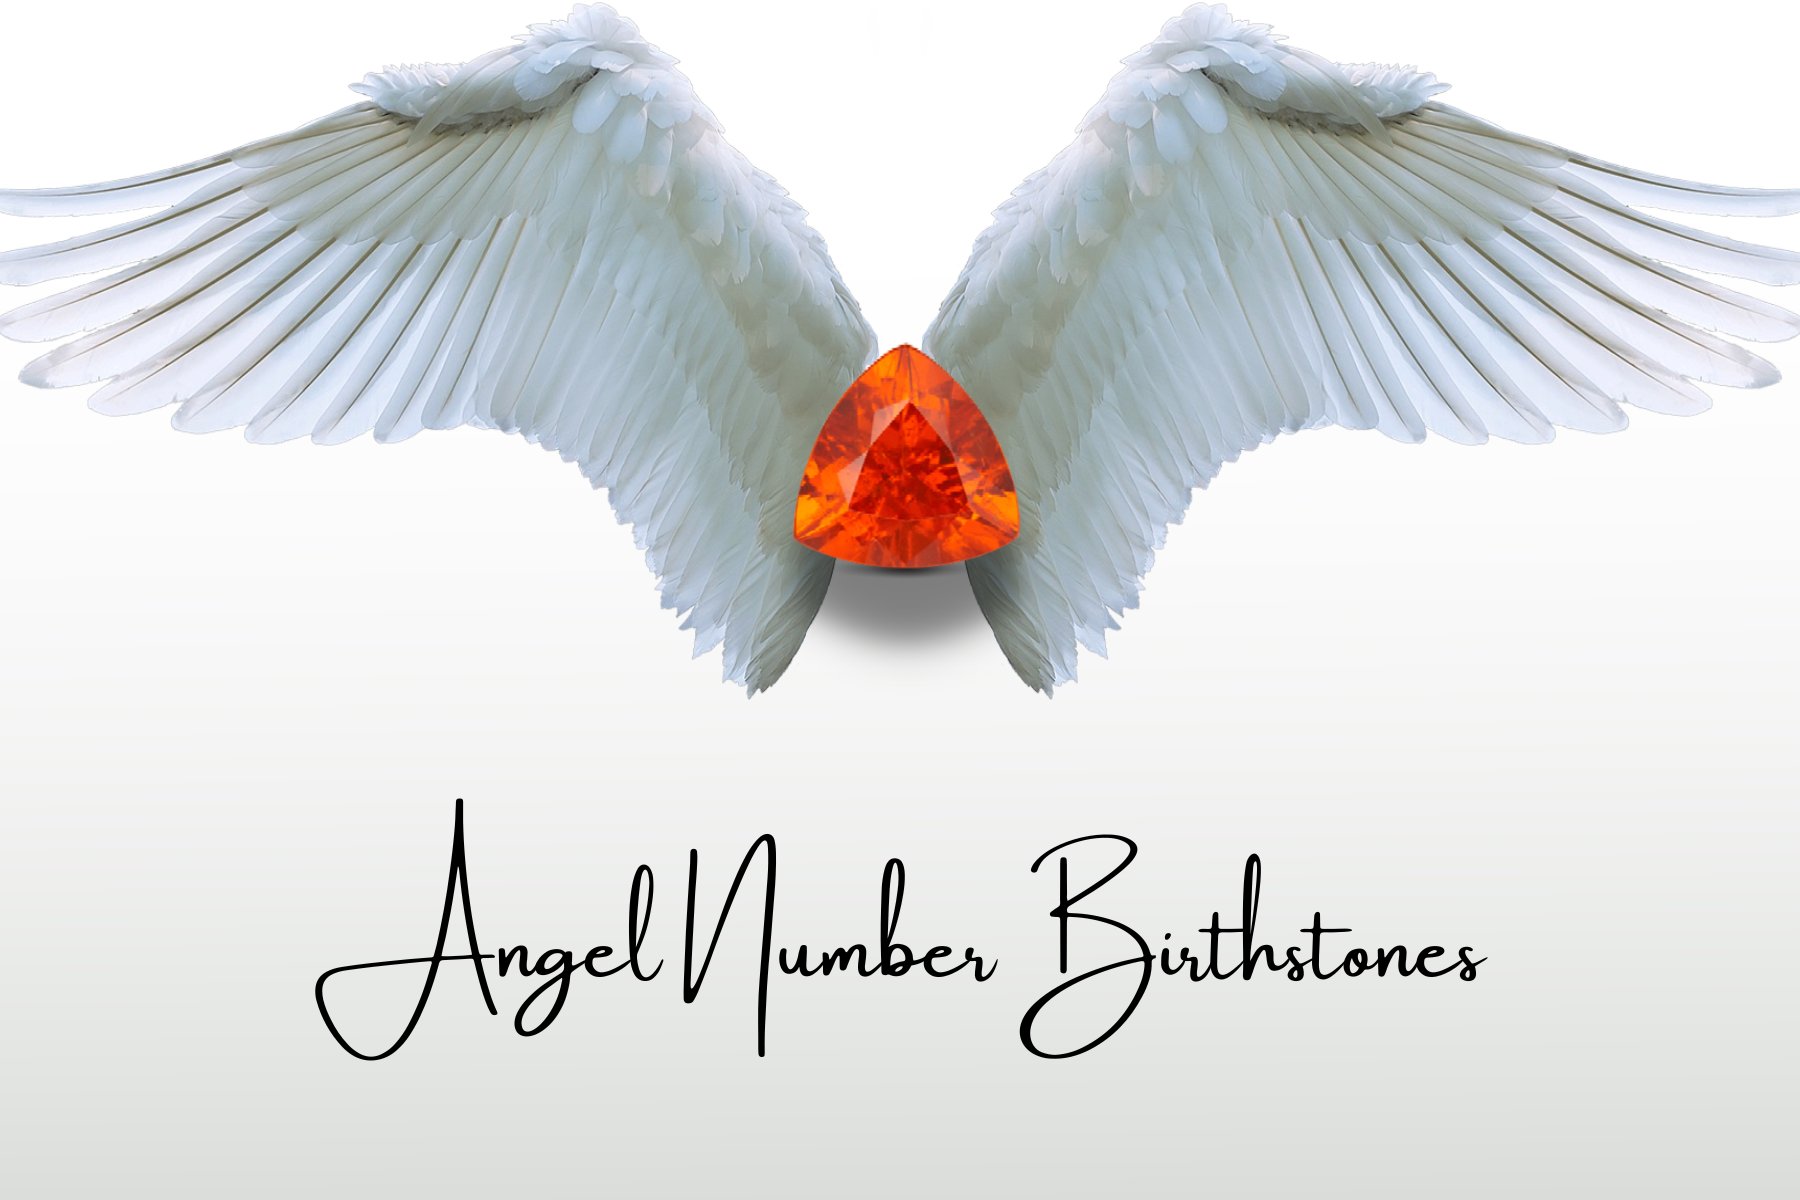 Angel Number Birthstones - Do Angels And Birthstones Pair Perfectly?